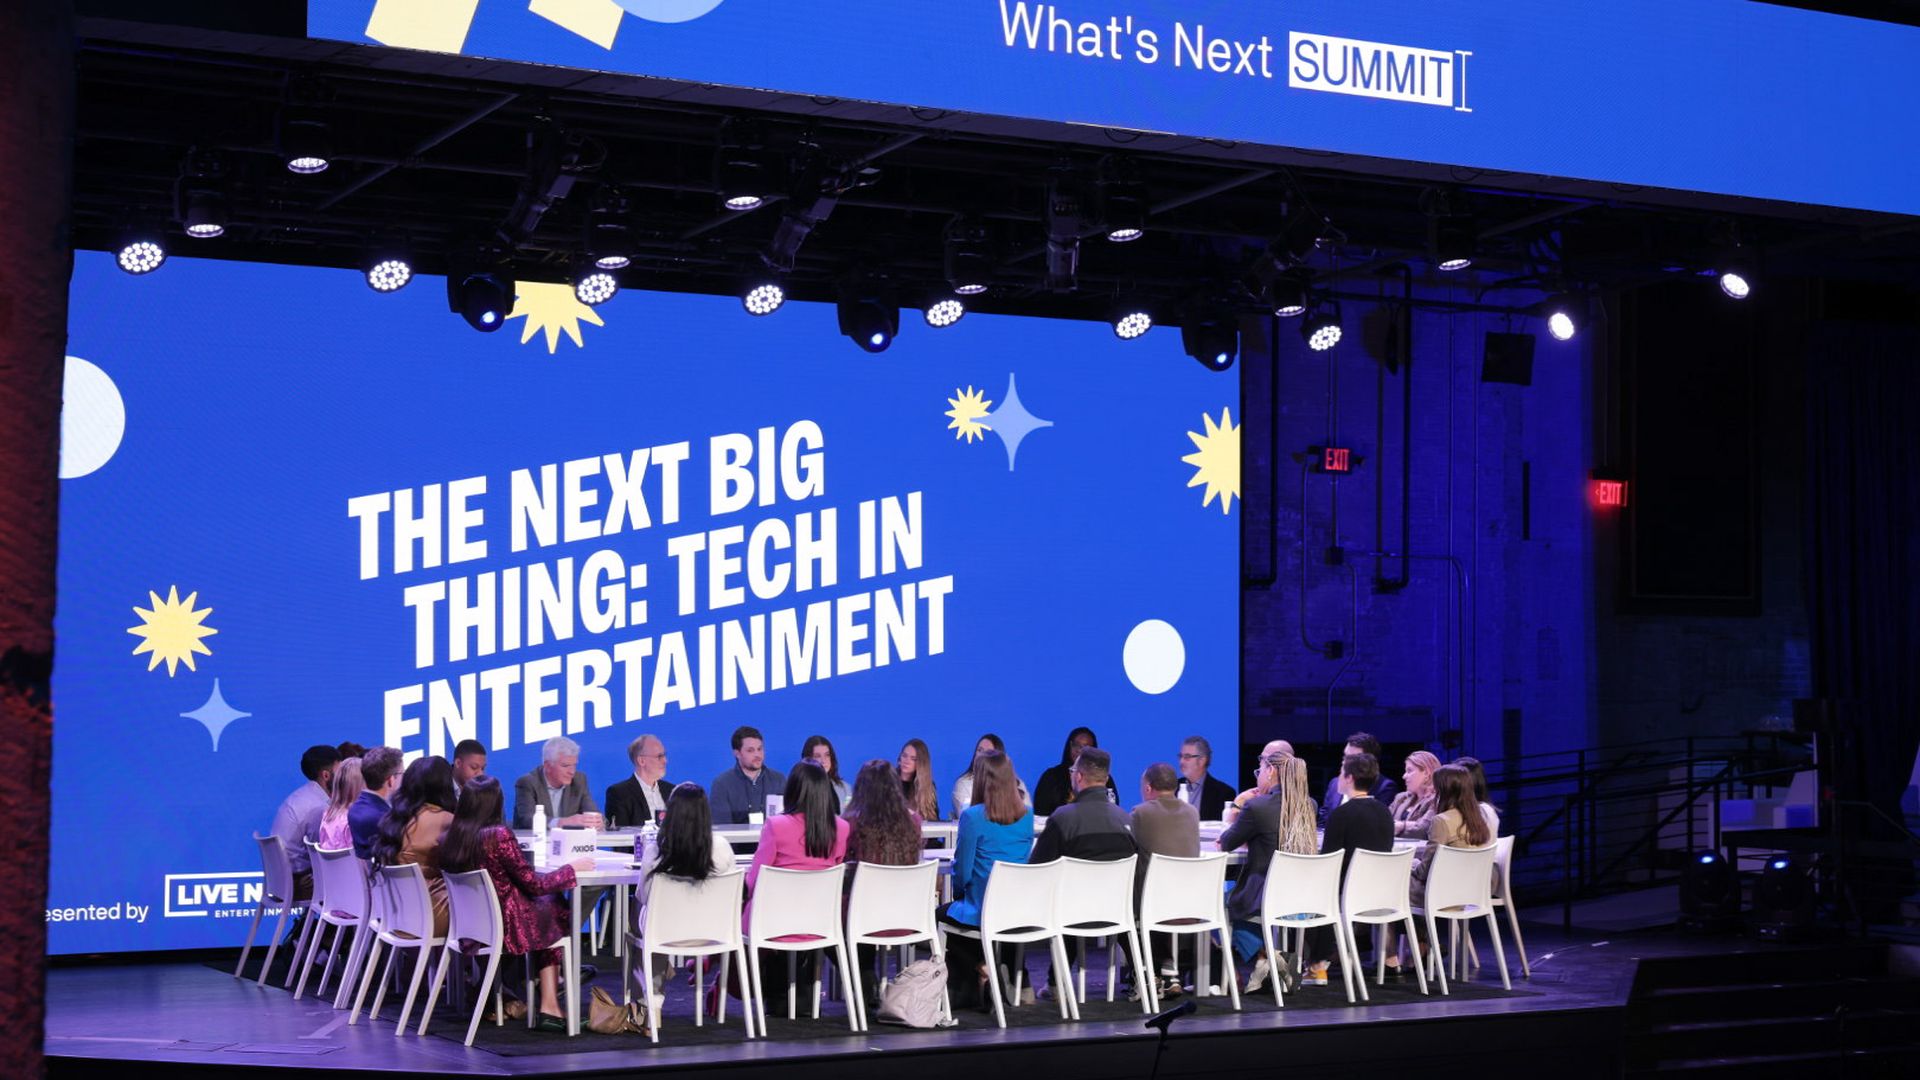 About 30 people seated in white chairs around a rectangular table in front of a blue screen that reads "The Next Big Thing: Tech In Entertainment"